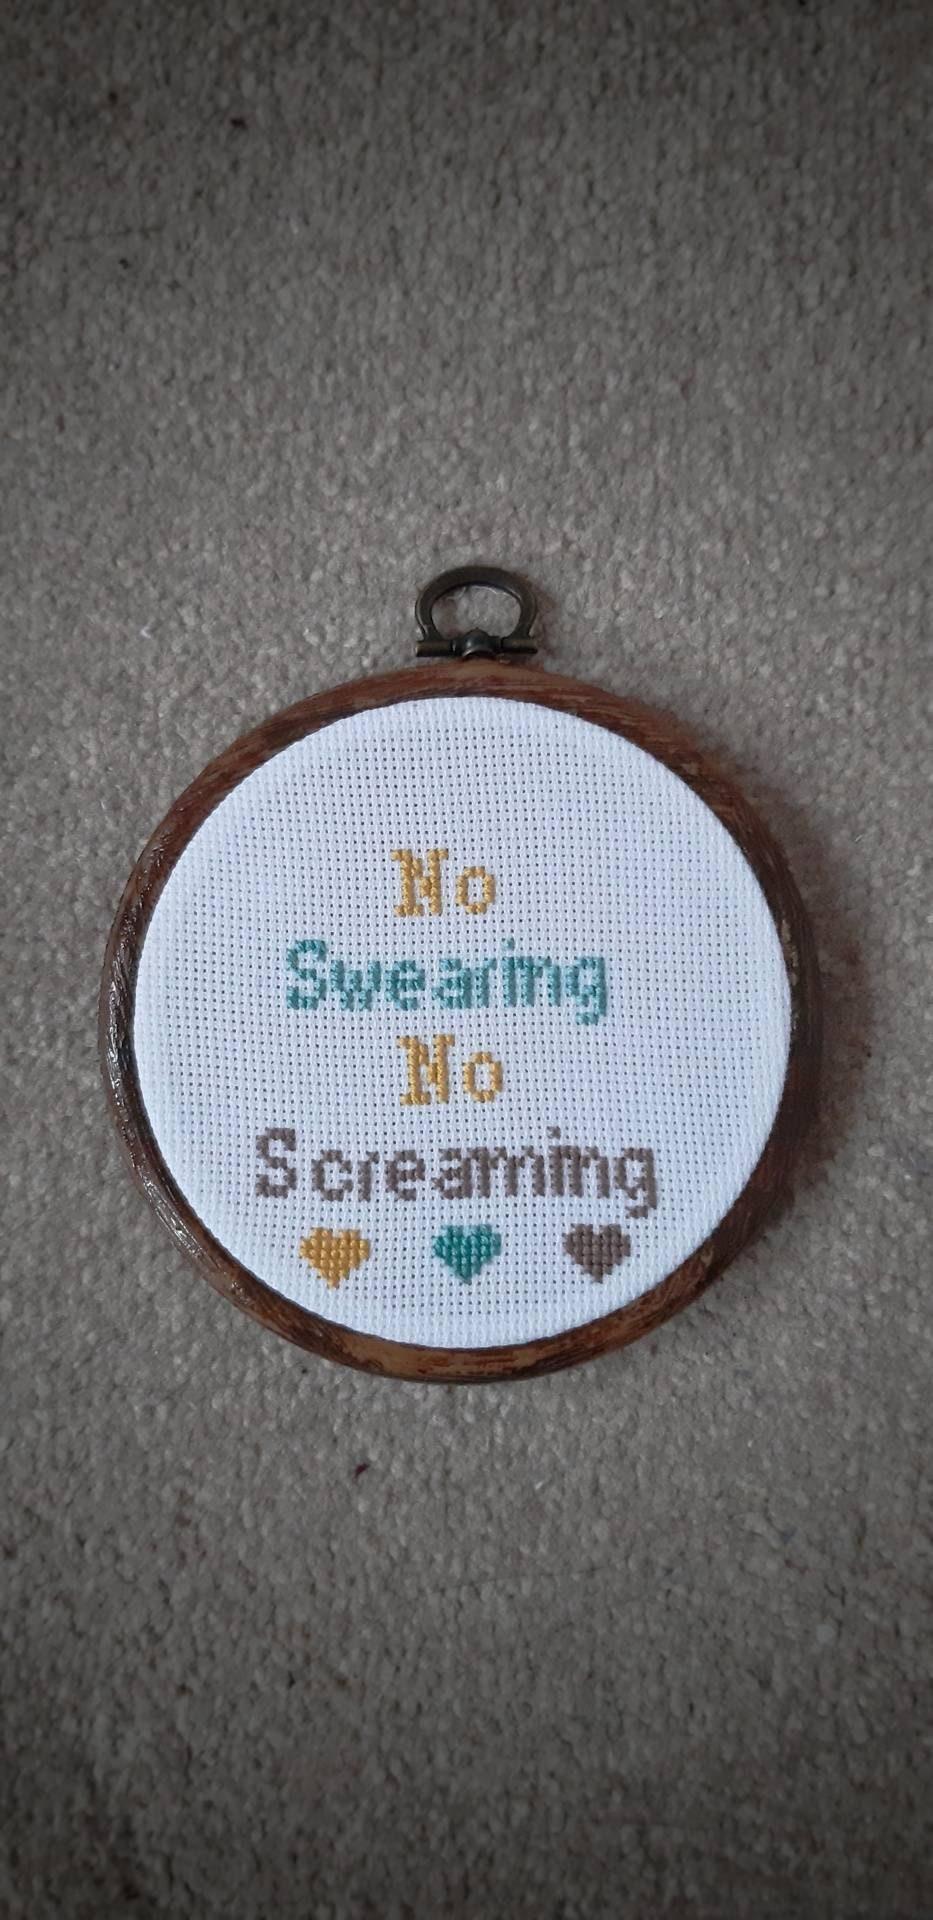 No swearing, no screaming, completed cross stitch quote - Thistleflat Crafts